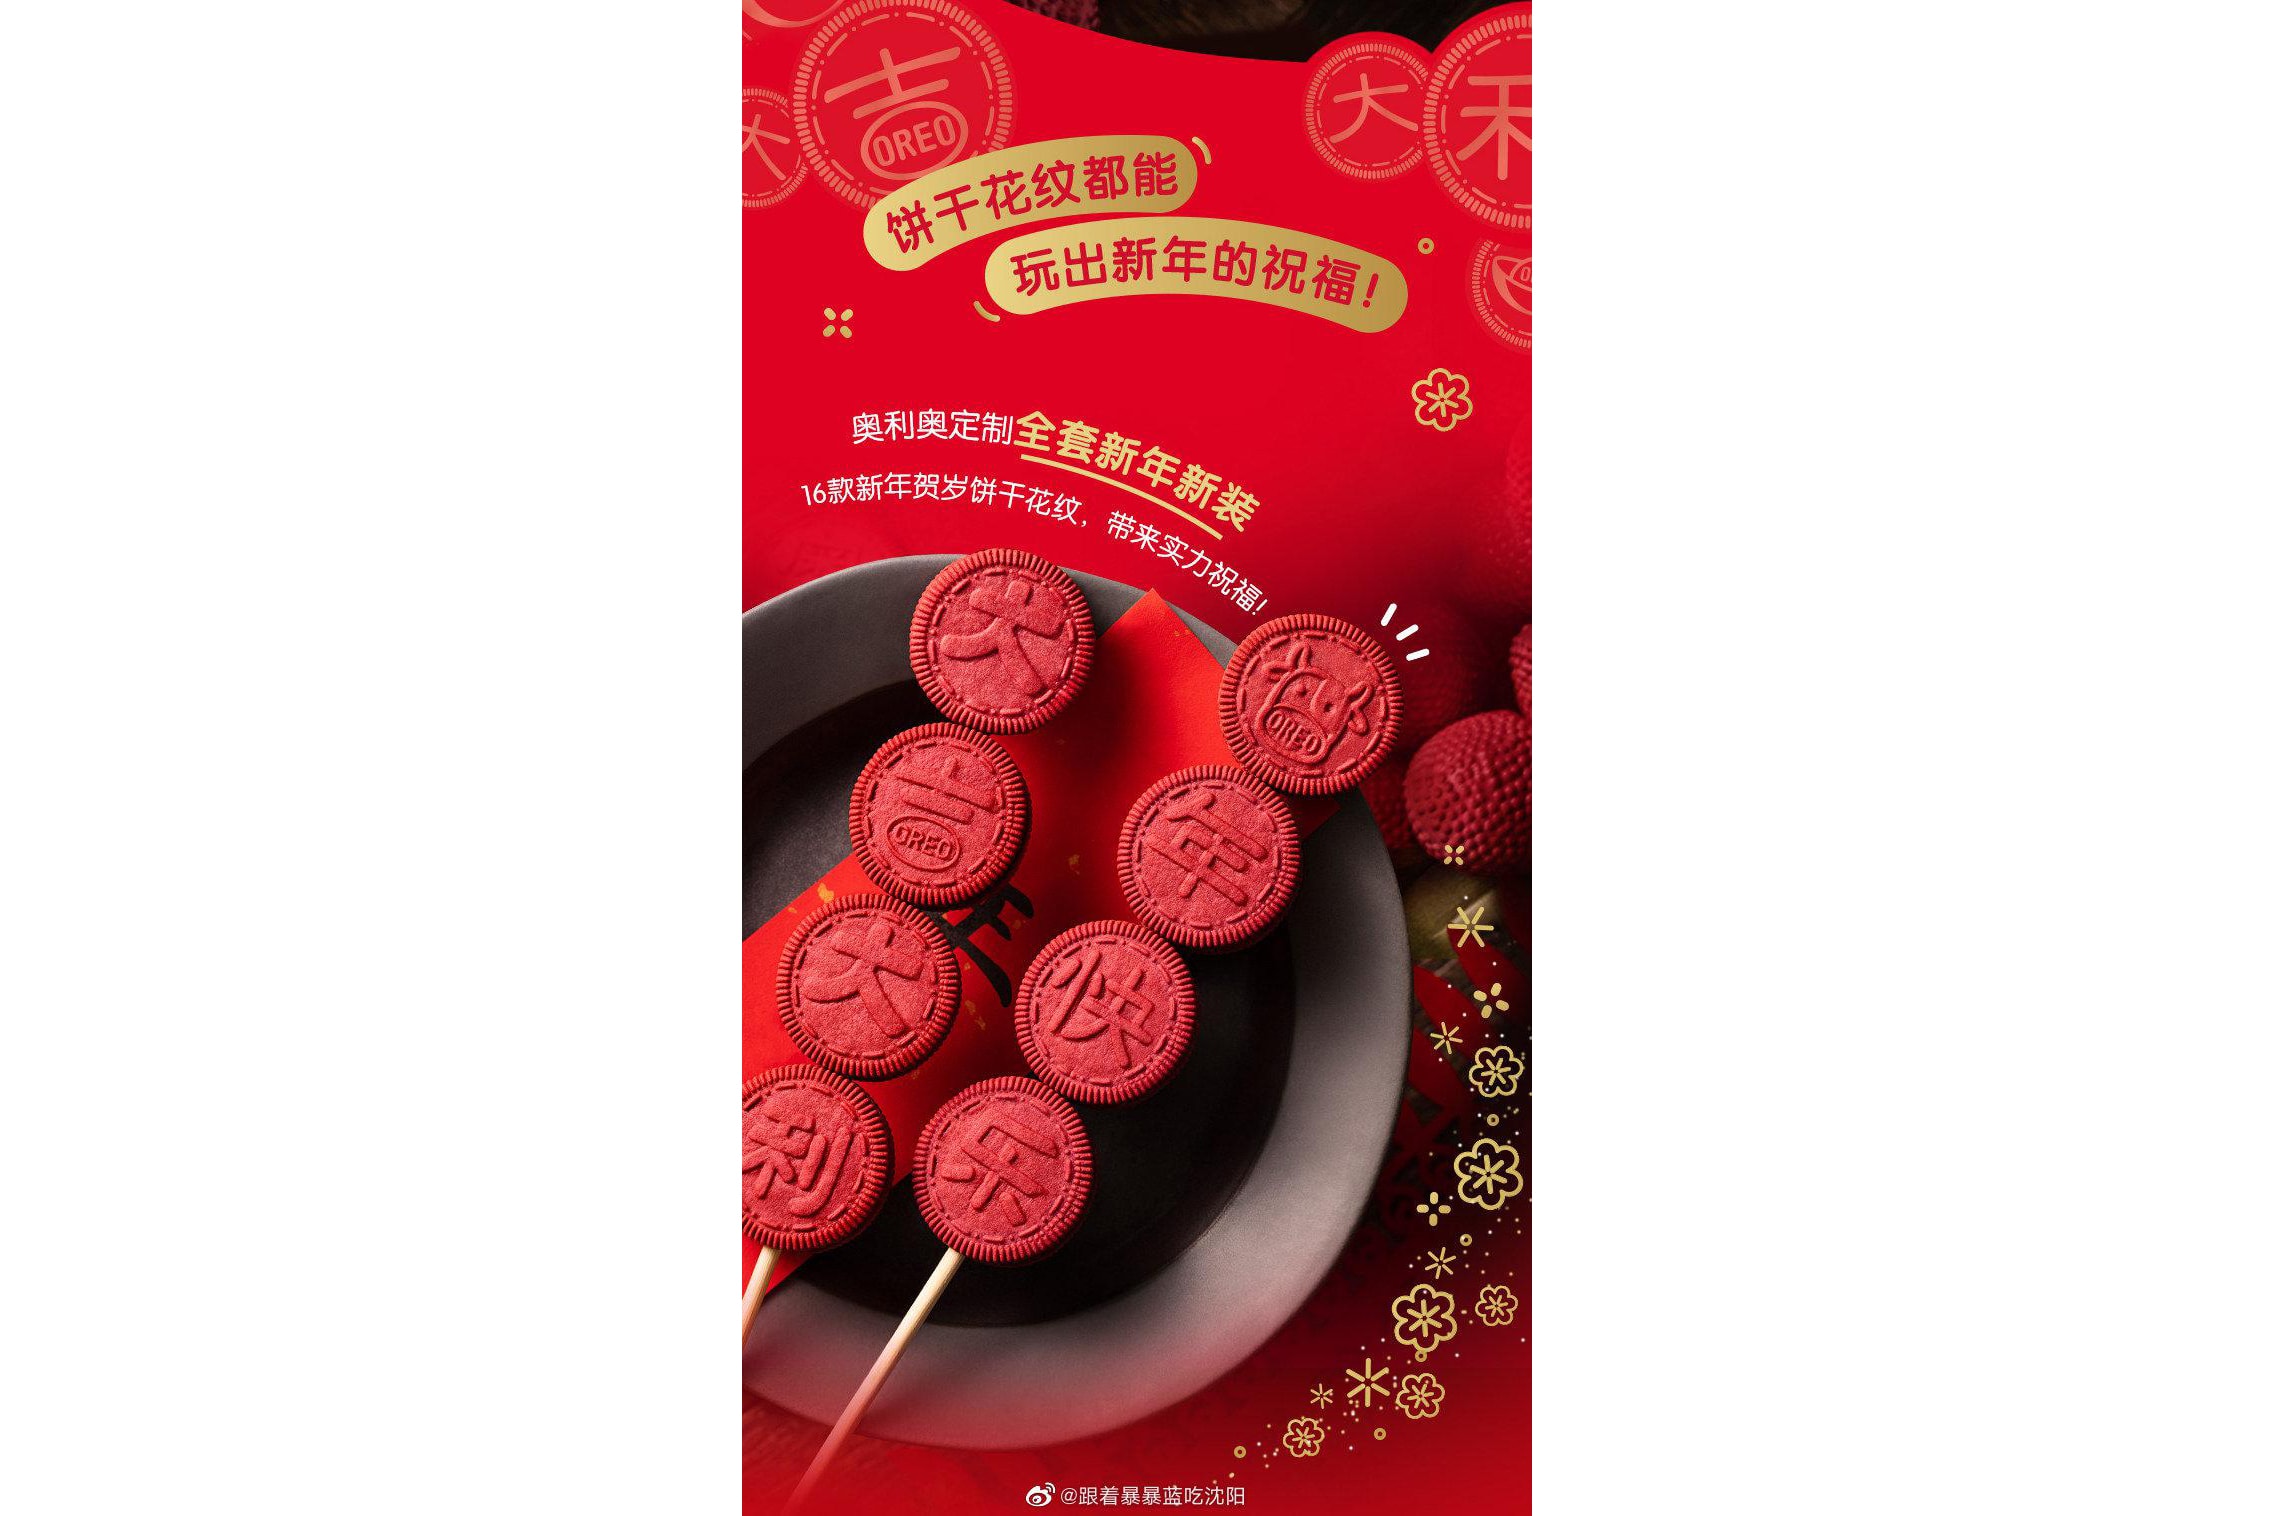 Oreo Lychee Flavor Lunar Chinese New Year 2021